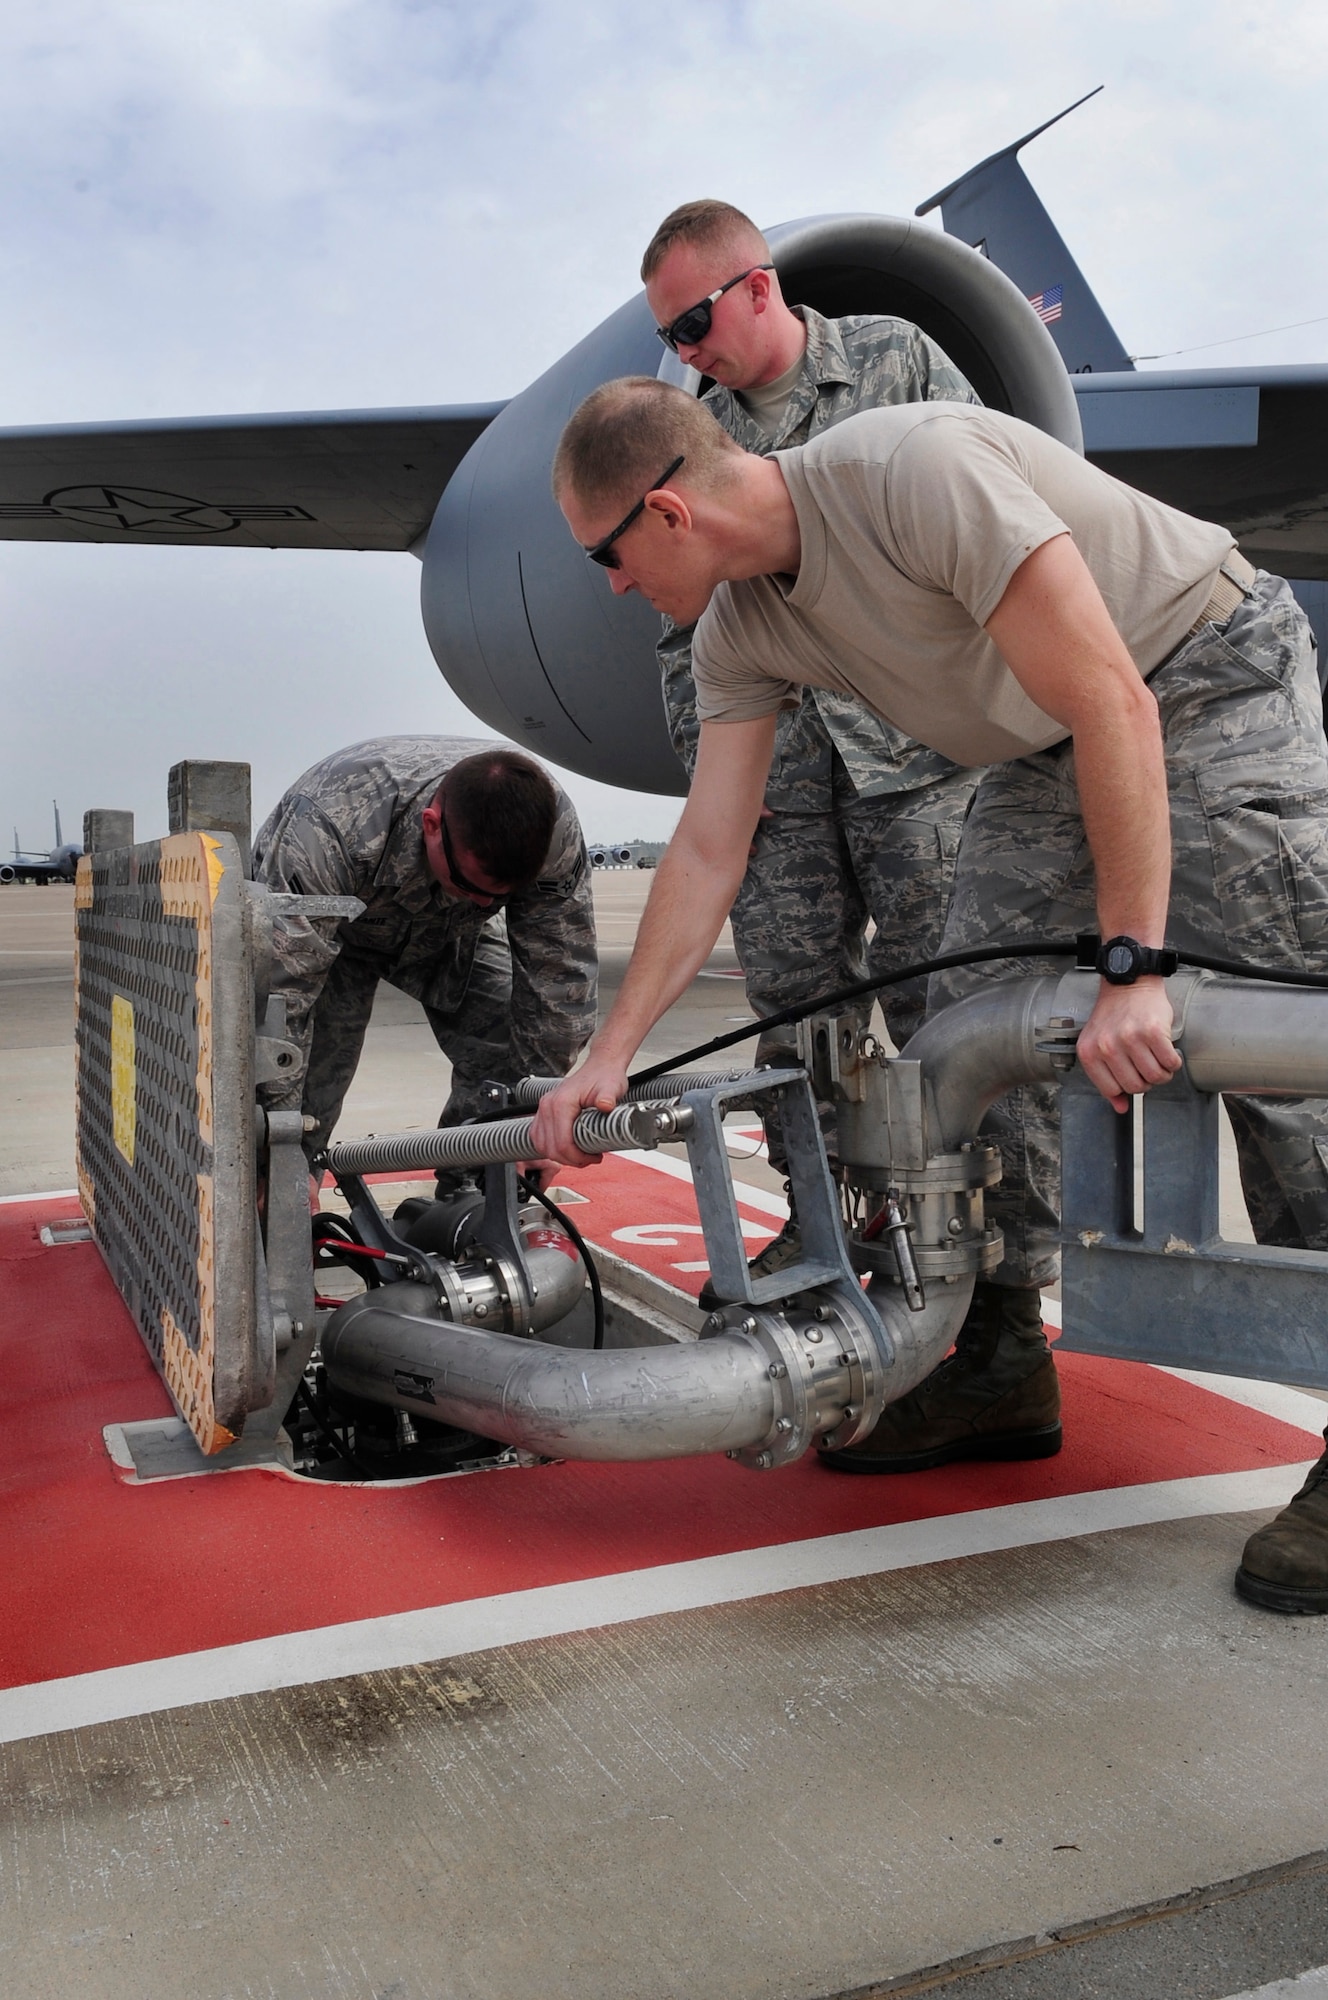 313th AIR EXPEDITIONARY WING -- Airmen from the 100th Logistics Readiness Squadron work a pantograph into place to attach it to an underground fuel source to refuel a KC-135 Stratotanker in support of Joint Task Force Odyssey Dawn March 25. Joint Task Force Odyssey Dawn is the U.S. Africa Command task force established to provide operational and tactical command and control of U.S. military forces supporting the international response to the unrest in Libya and enforcement of United Nations Security Council Resolution (UNSCR) 1973. UNSCR 1973 authorizes all necessary measures to protect civilians in Libya under threat of attack by Gadhafi regime forces. JTF Odyssey Dawn is commanded by U.S. Navy Admiral Samuel J. Locklear, III. (U.S. Air Force photo/Senior Airman Ethan Morgan)